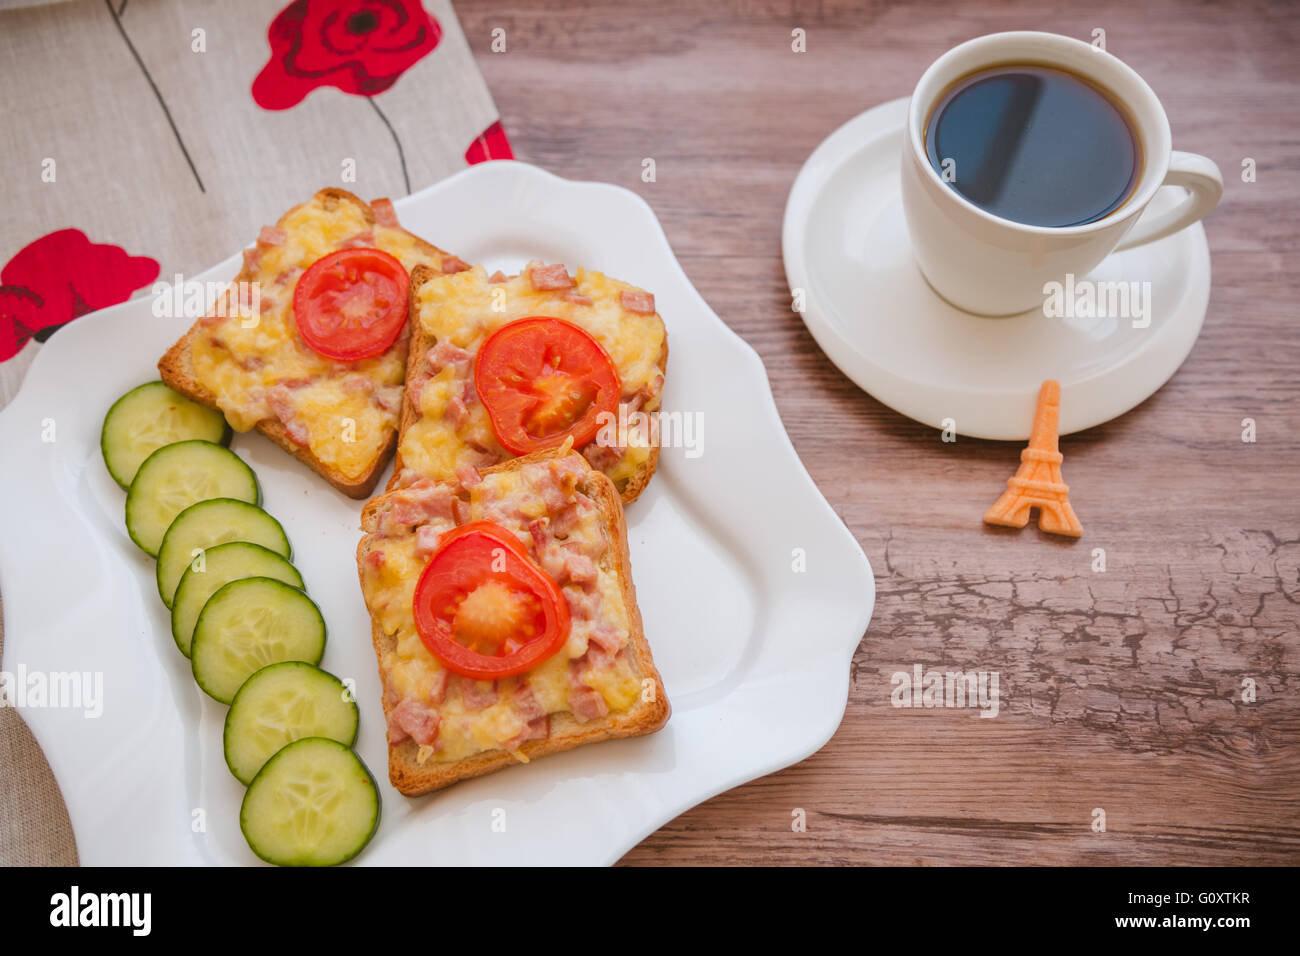 Morning breakfast: homemade toasted open sandwich with ham and cheese, coffee and fresh vegetables on wooden background Stock Photo